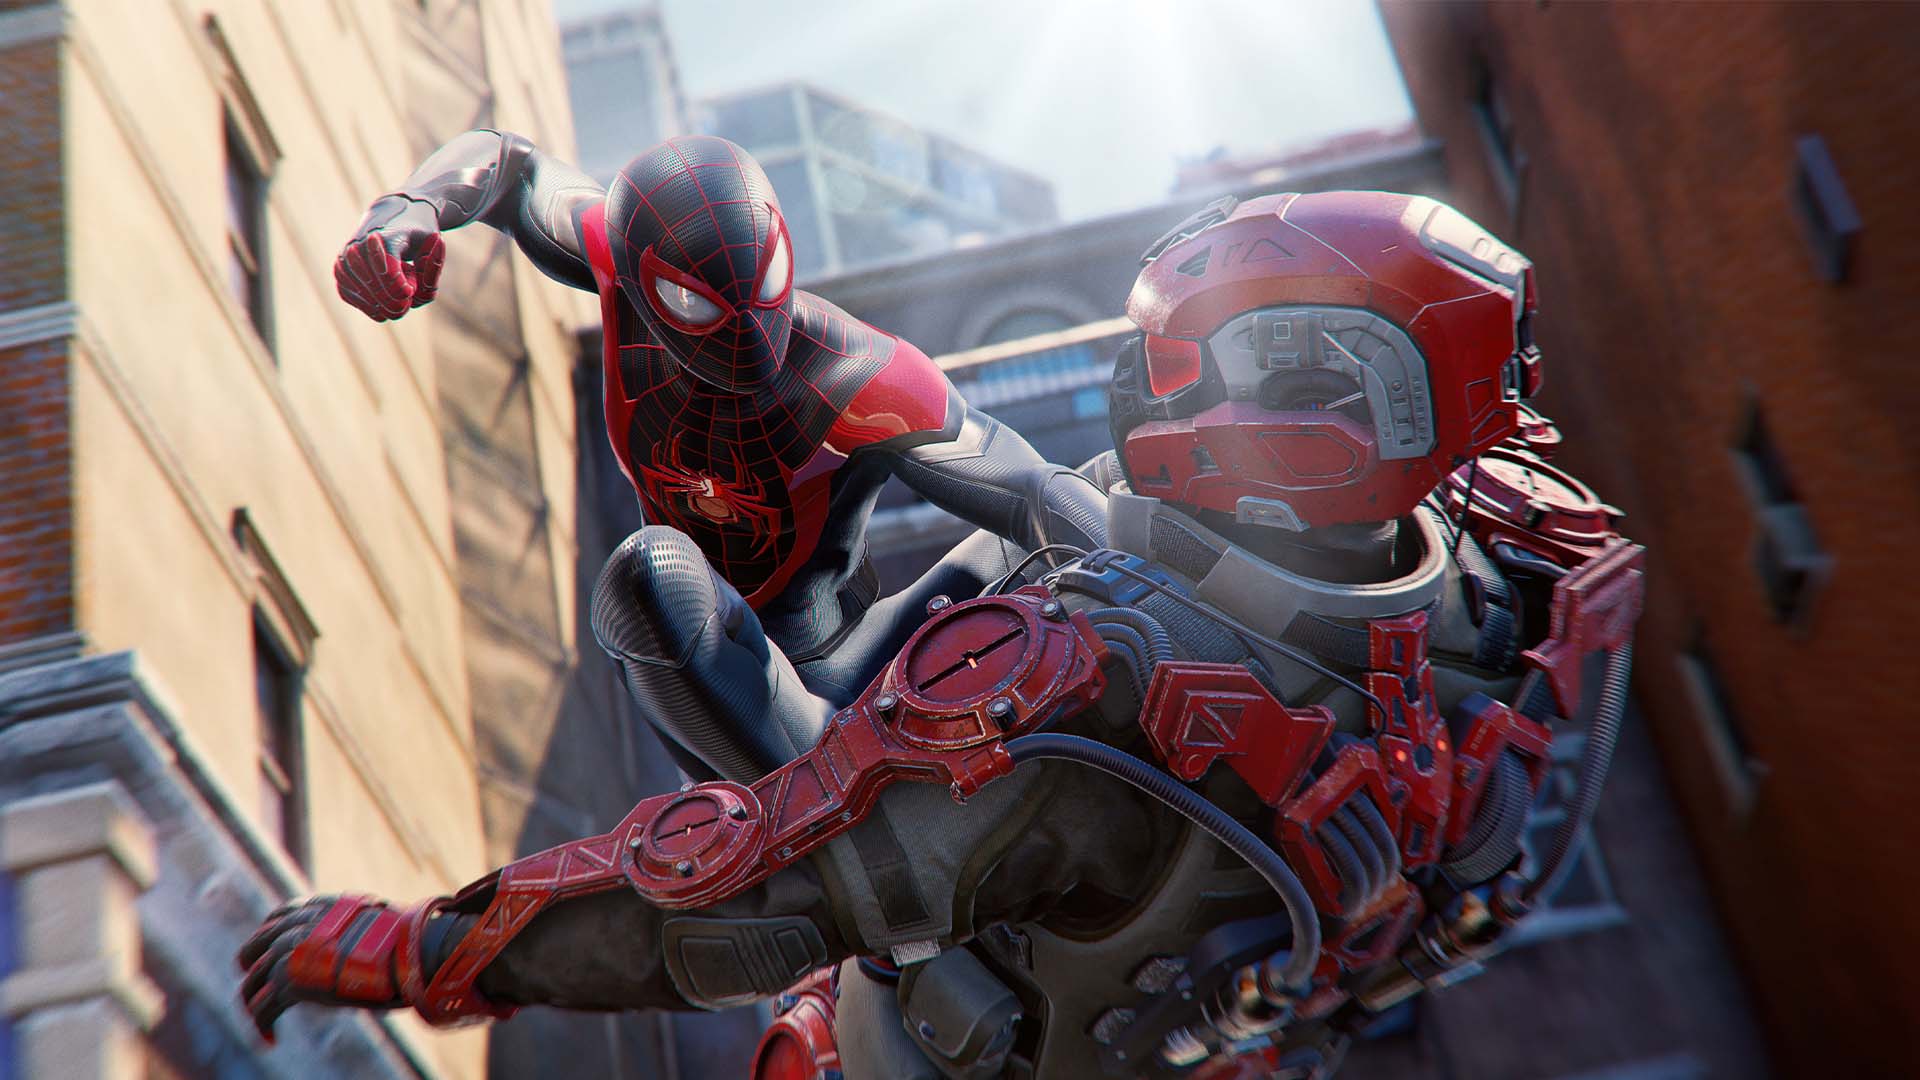 Marvel's Spiderman V. Spiderman: Miles Morales - Which Game Is Better?